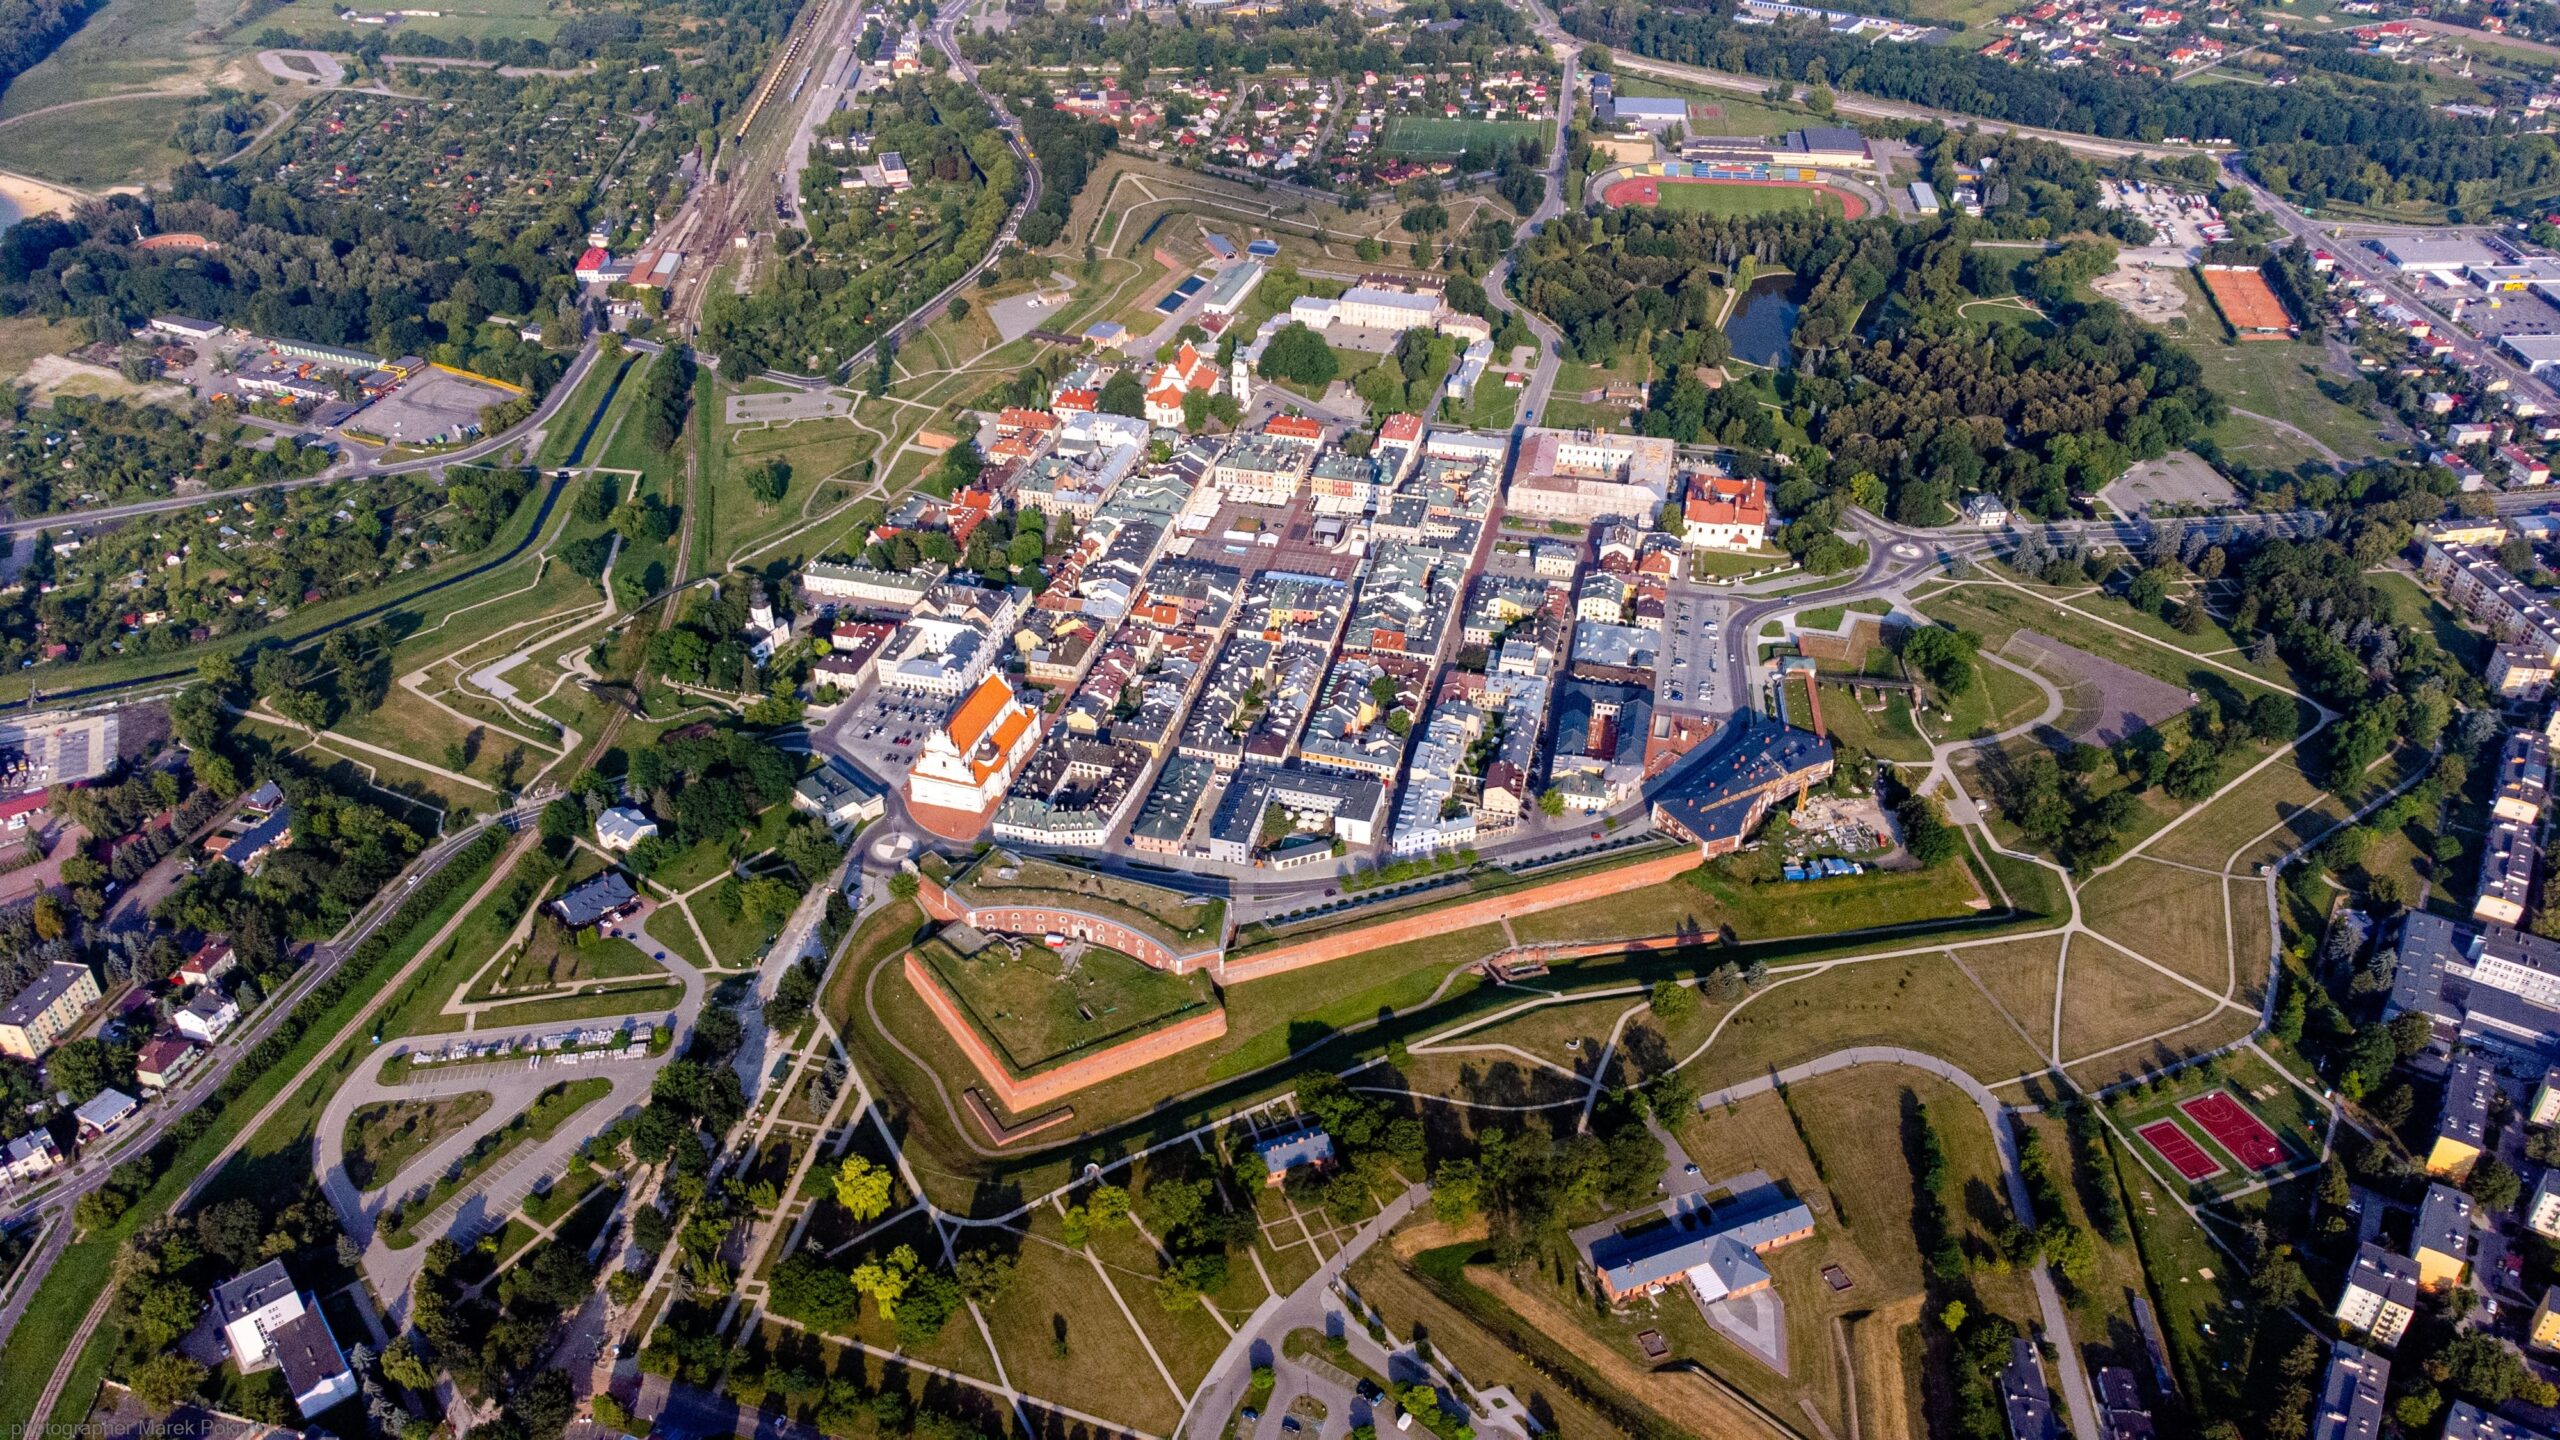 The Lublin University of Technology is developing a digital twin of Zamość